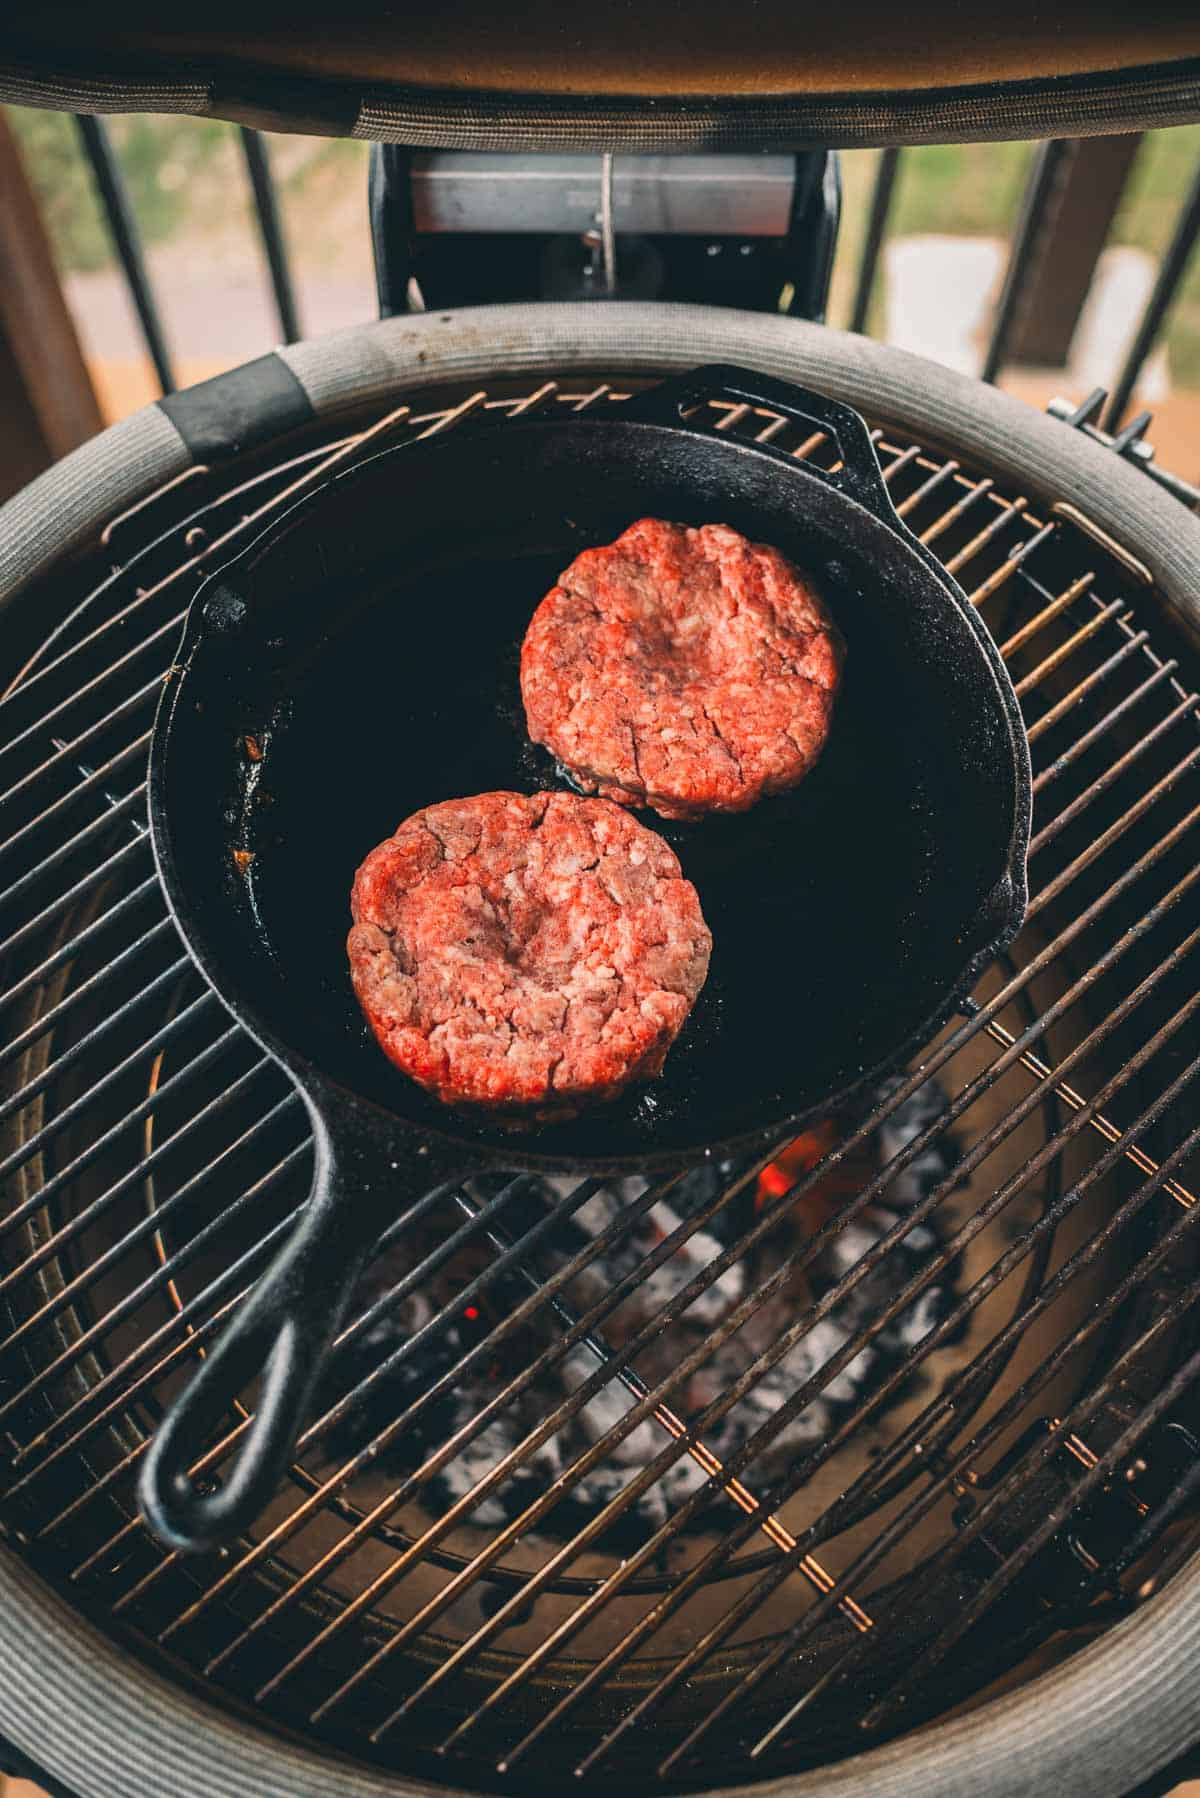 Two raw hamburger patties are cooking in a cast iron skillet placed on a grill.